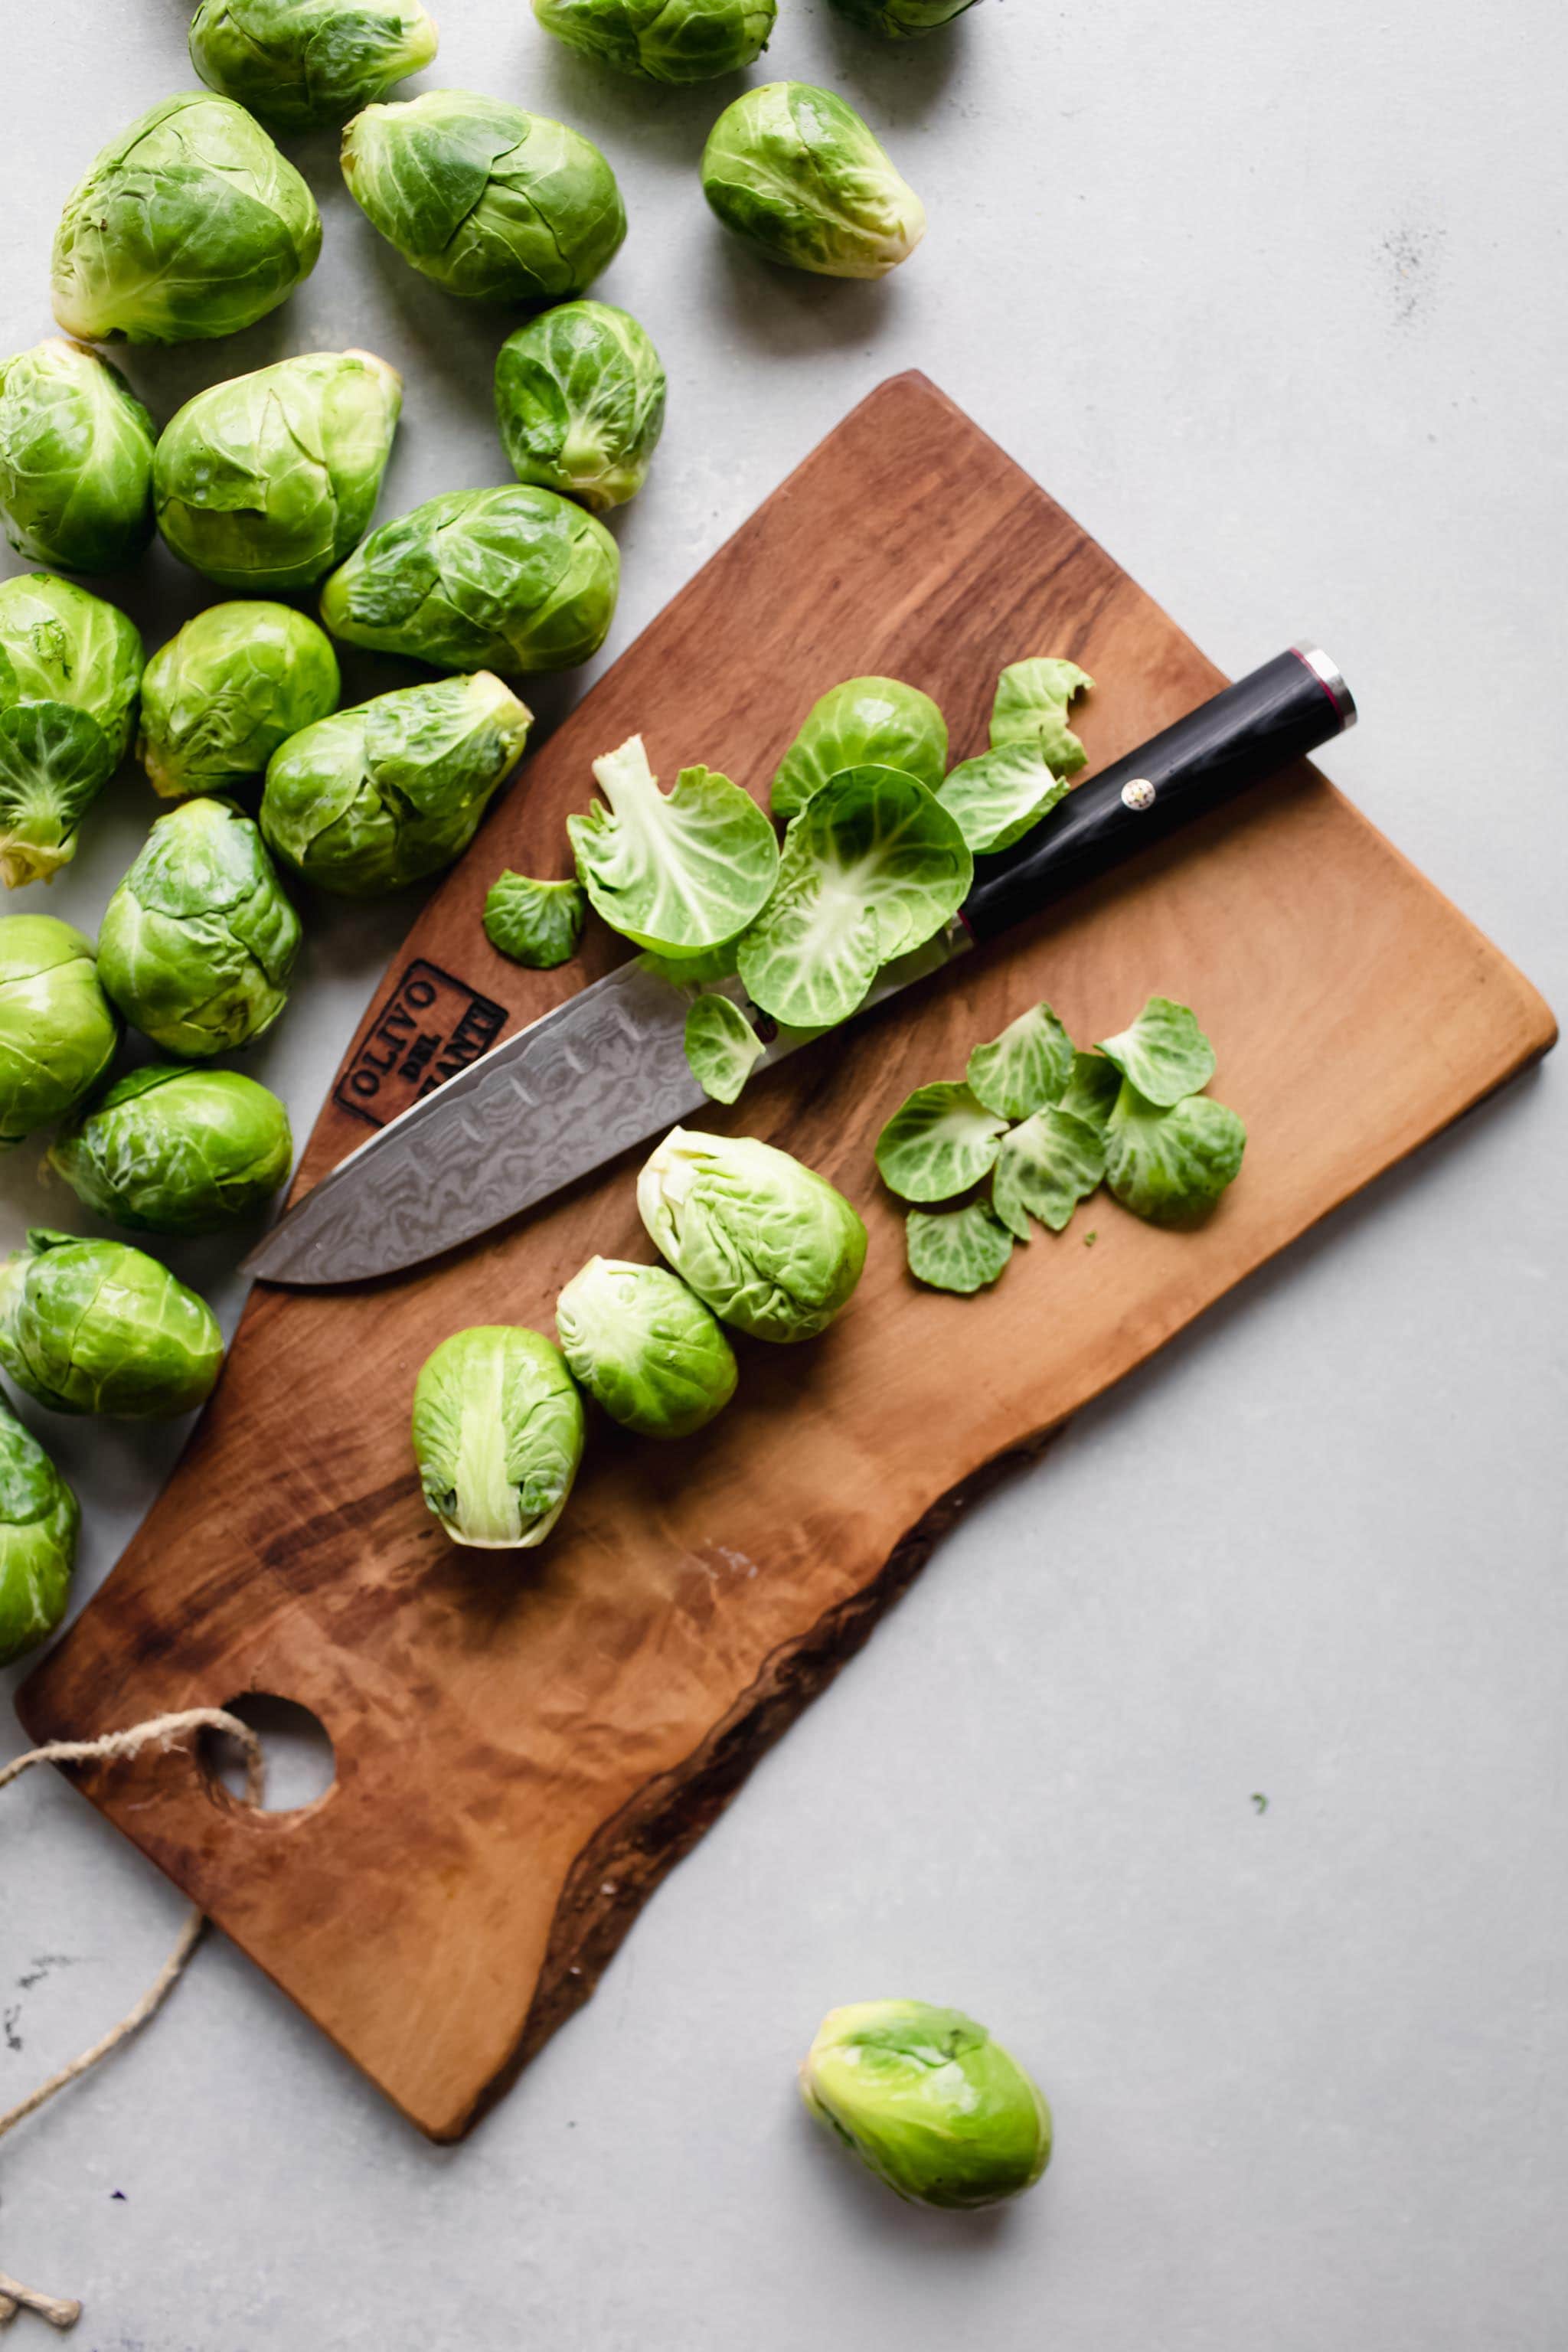 Brussel sprouts being trimmed on cutting board. 